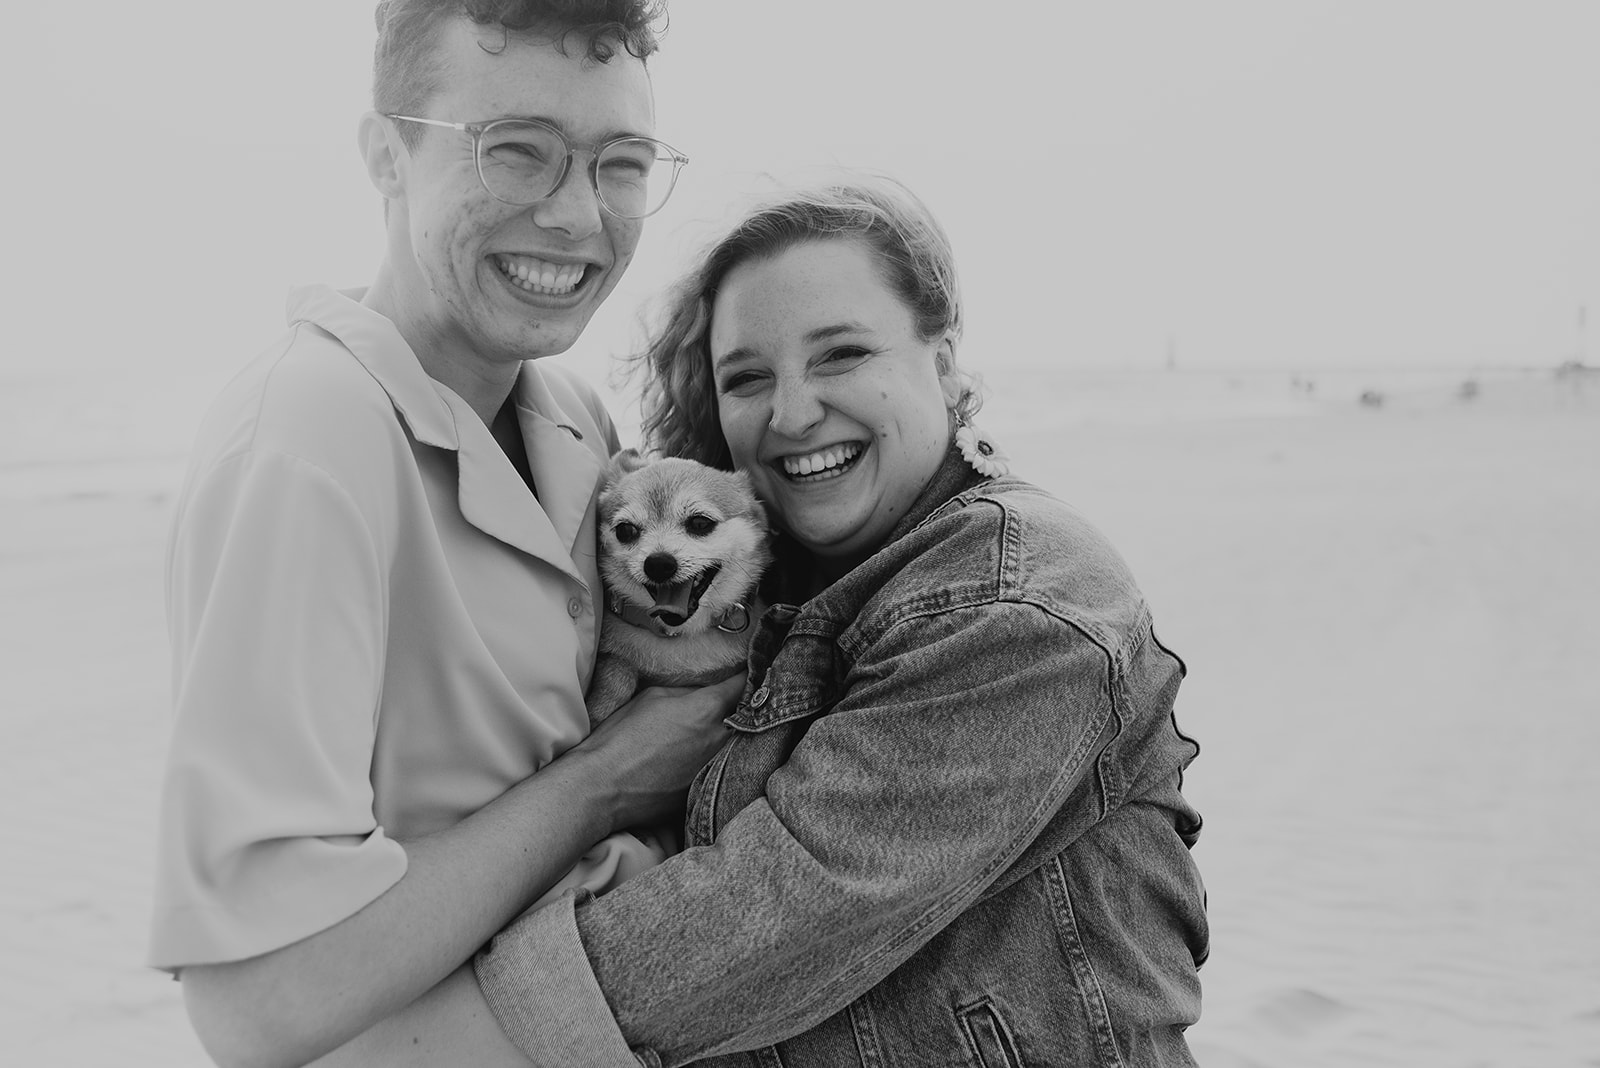 dog at the beach, engagement session, beach session, Michigan, Grand Haven City Beach